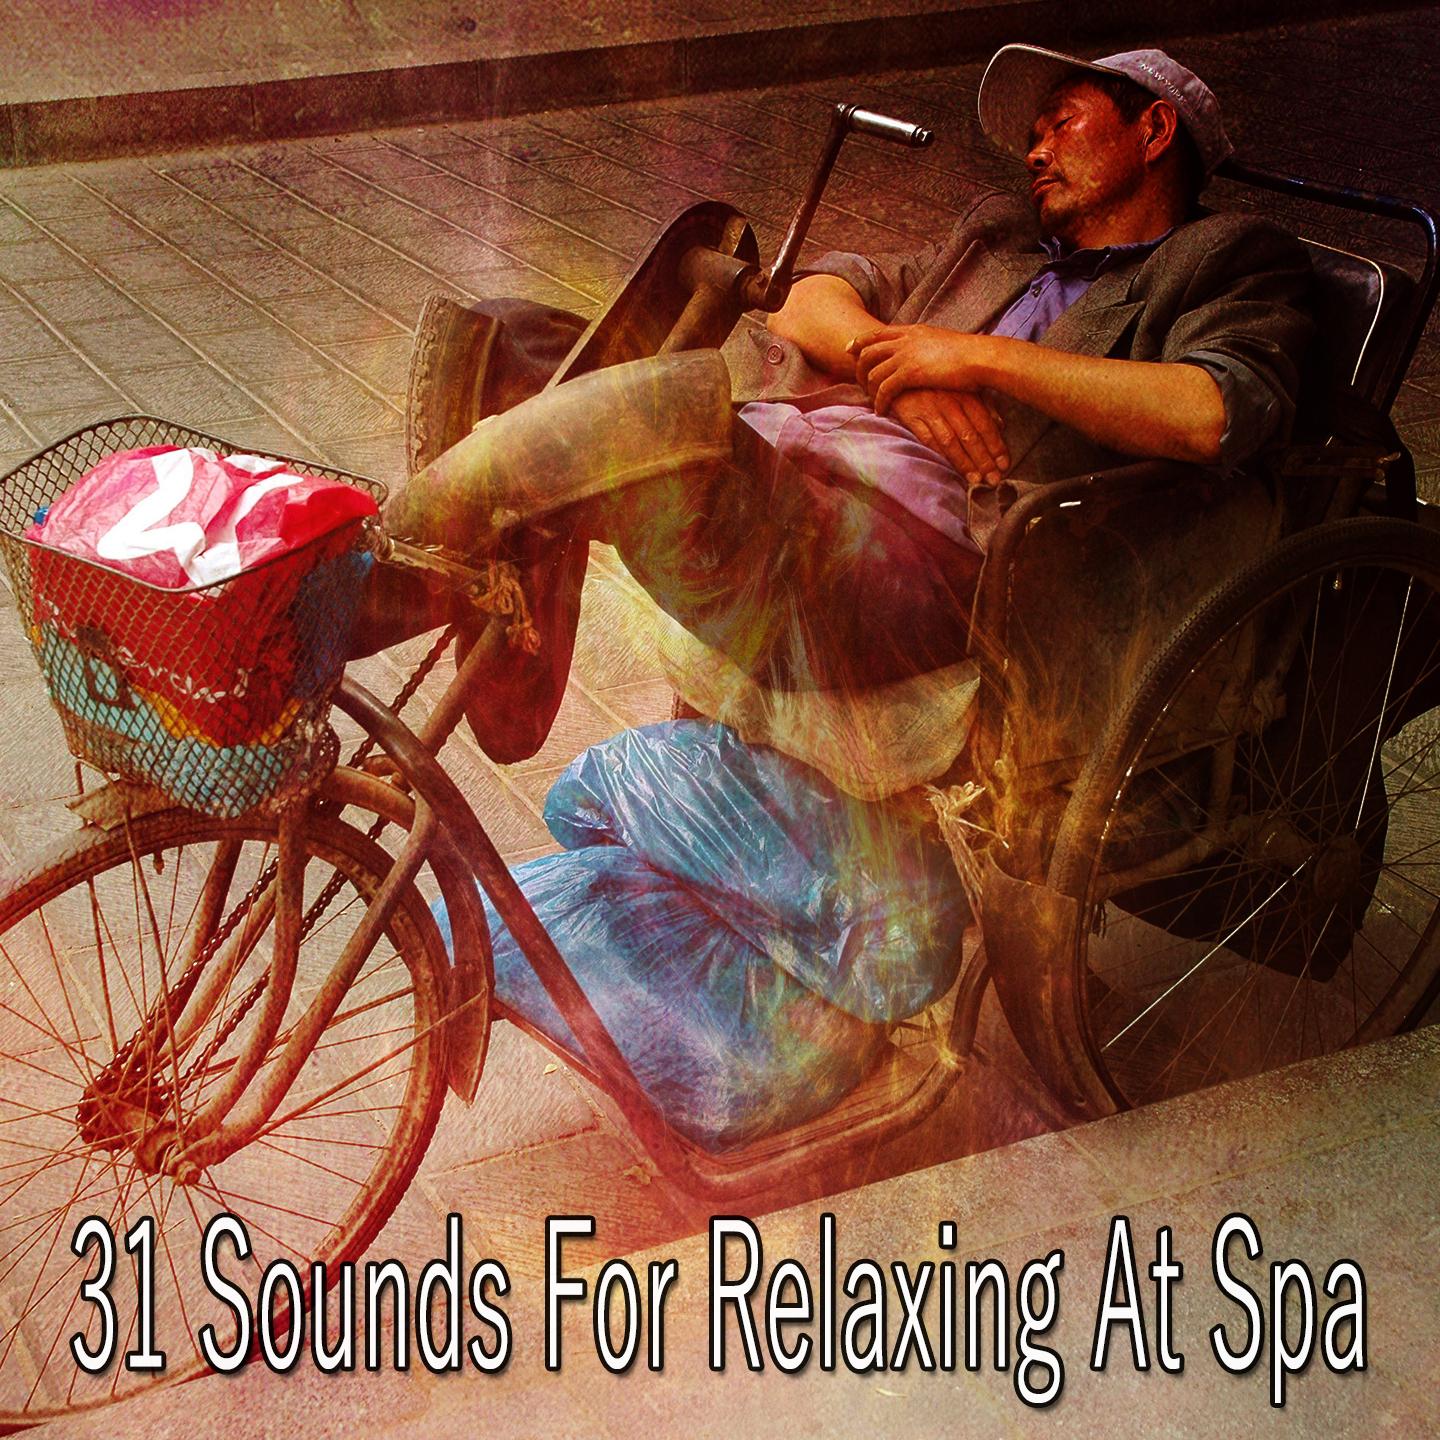 31 Sounds For Relaxing At Spa